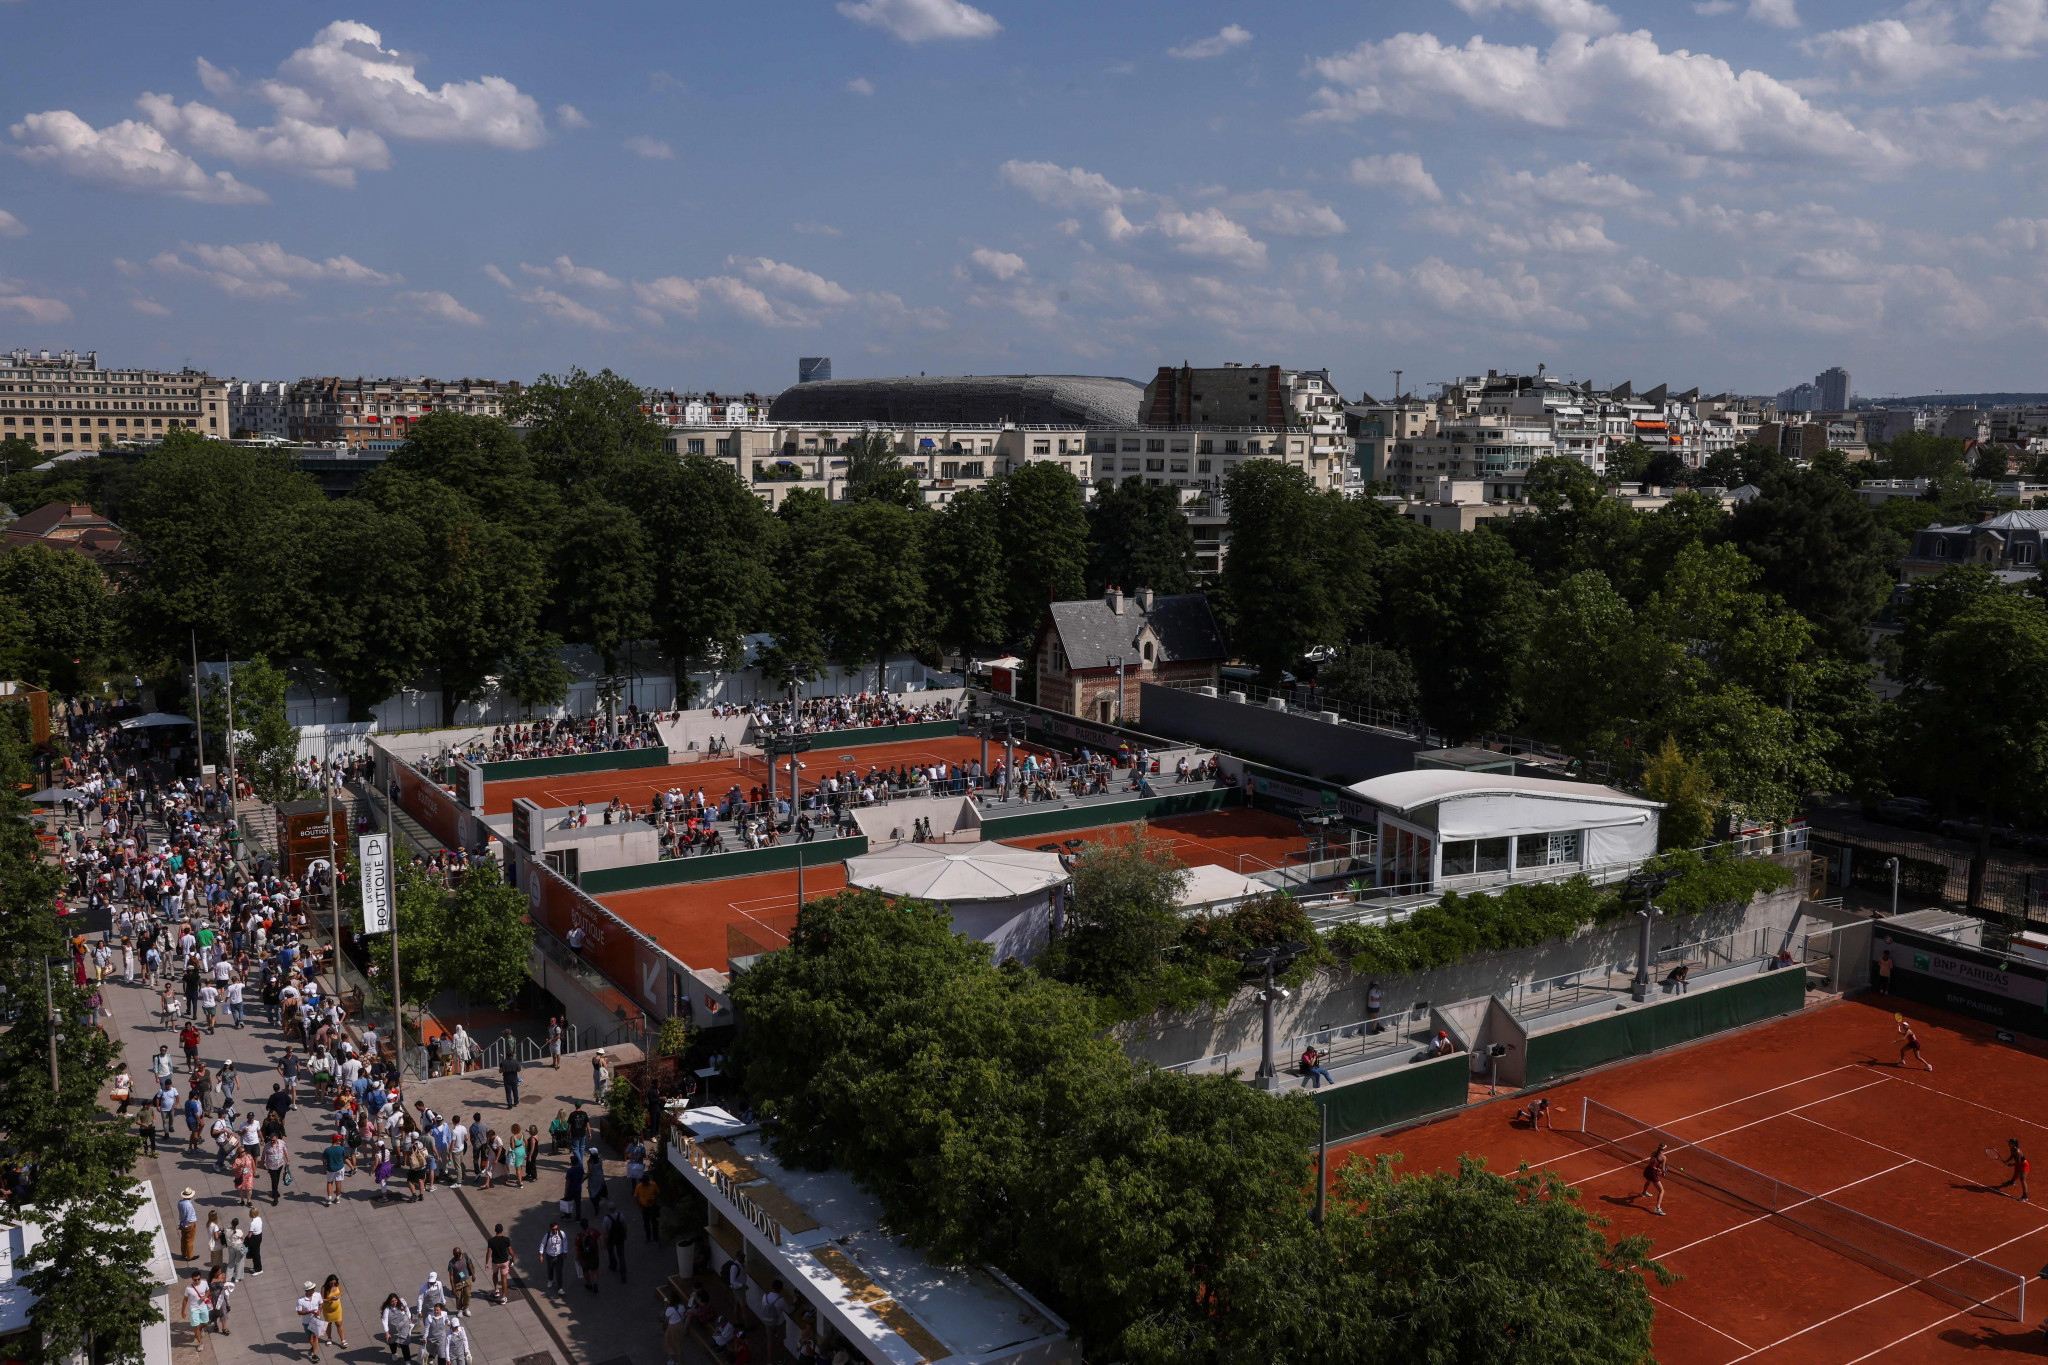 IOC Coordination Commission members spent time at the French Open tennis during their visit, which is being held at Roland Garros, tennis and boxing venue for Paris 2024 ©Getty Images